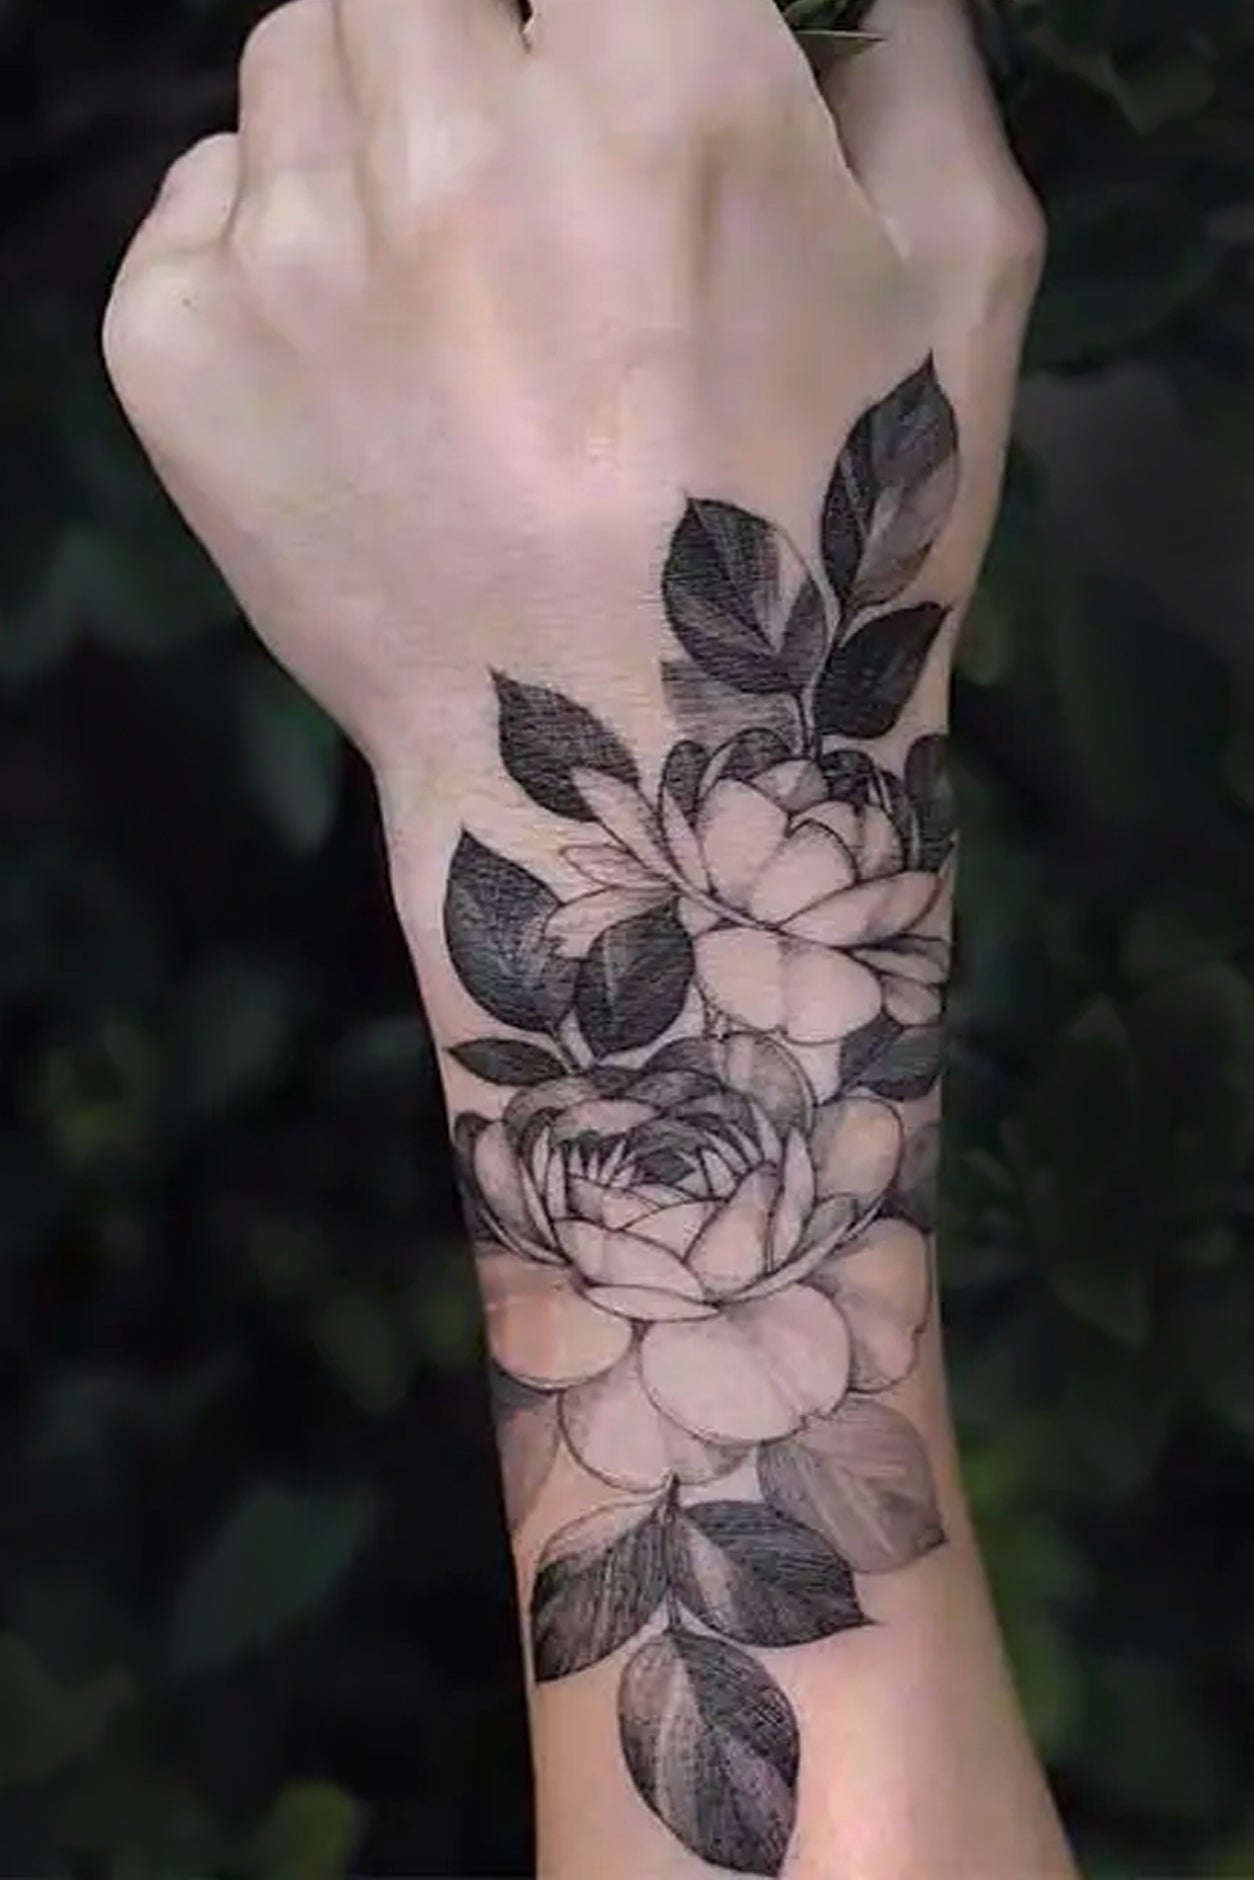 An arm displays this rose Temporary Tattoo, In the traditional black ink style, a gentle bouquet of two roses in a soft triangular shape. This artwork has the traditional feel and look of a realistic inked tattoo.   Creatively wear this artwork on any part of your body, arm, leg, torso, or shoulder.